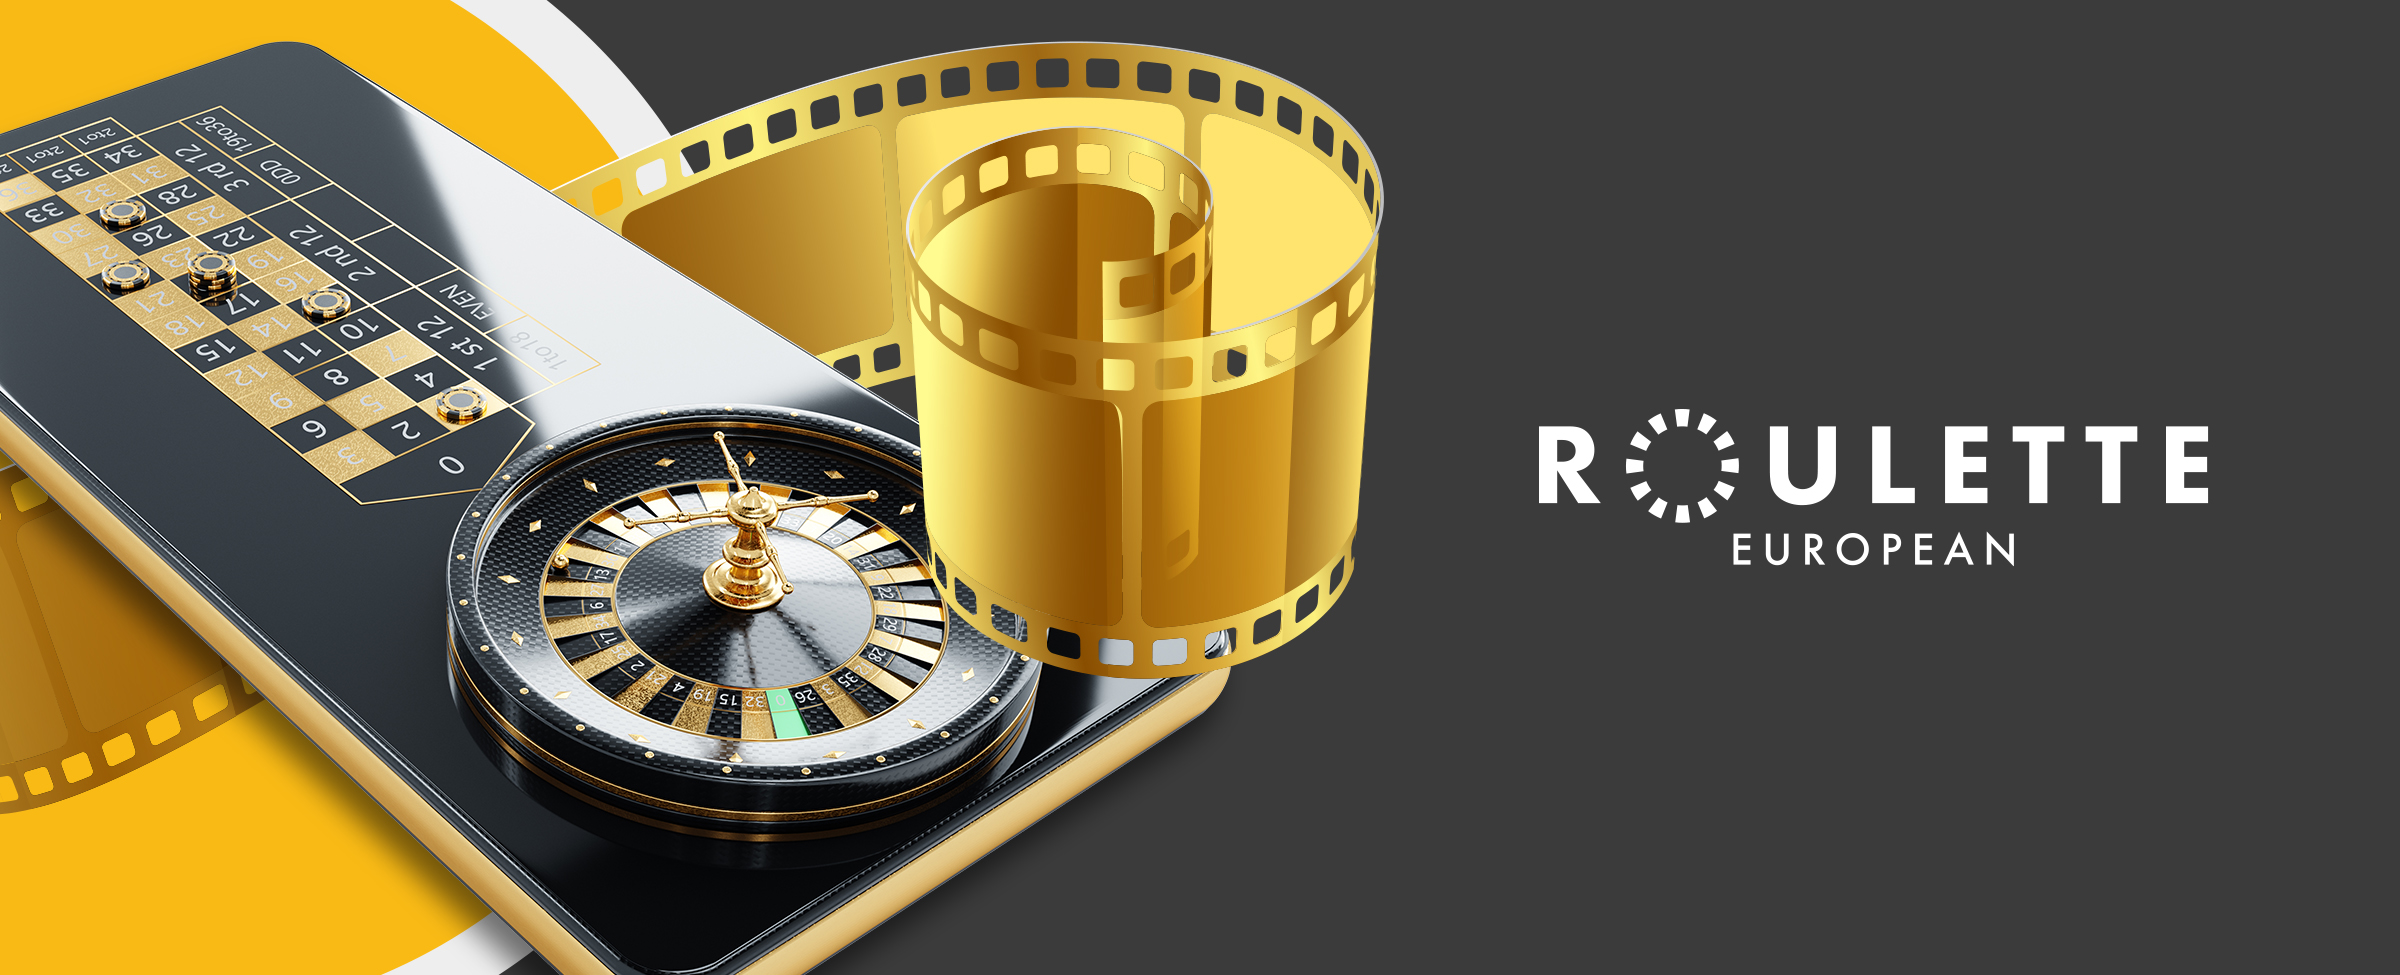 Wind back the clock to the classic mobster movie Casino, and accompany it with European Roulette. Is there a more fitting combo?